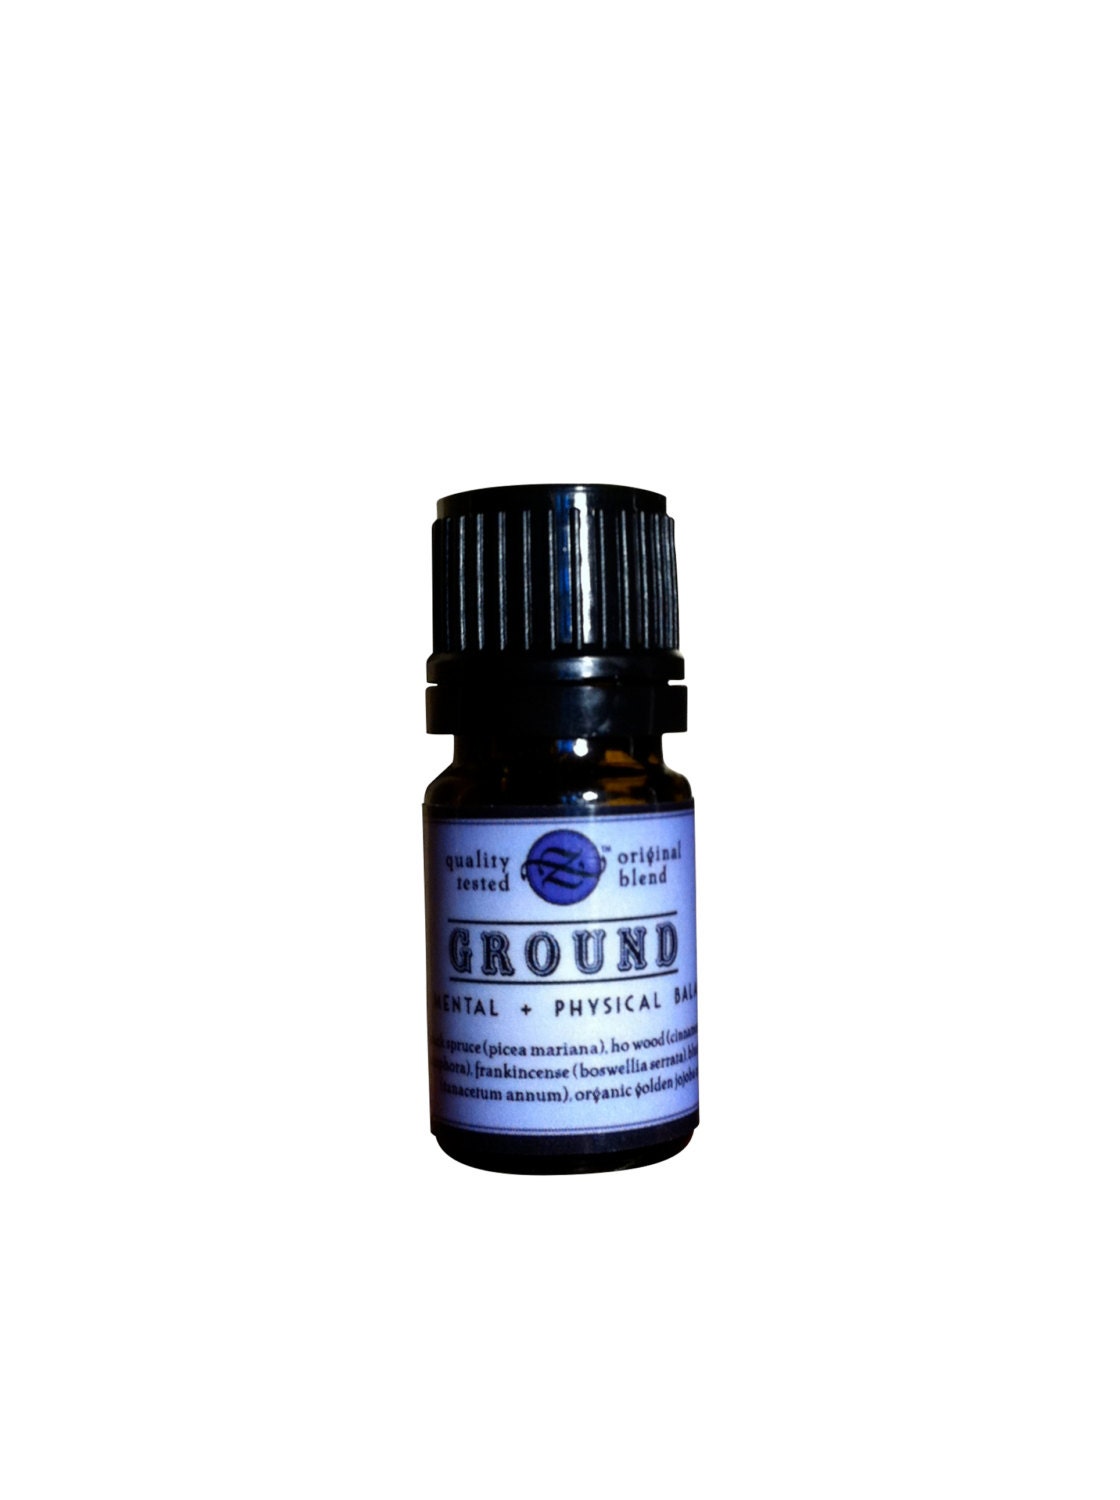 Ground Essential Oil Blend For Mental & Physical Balance